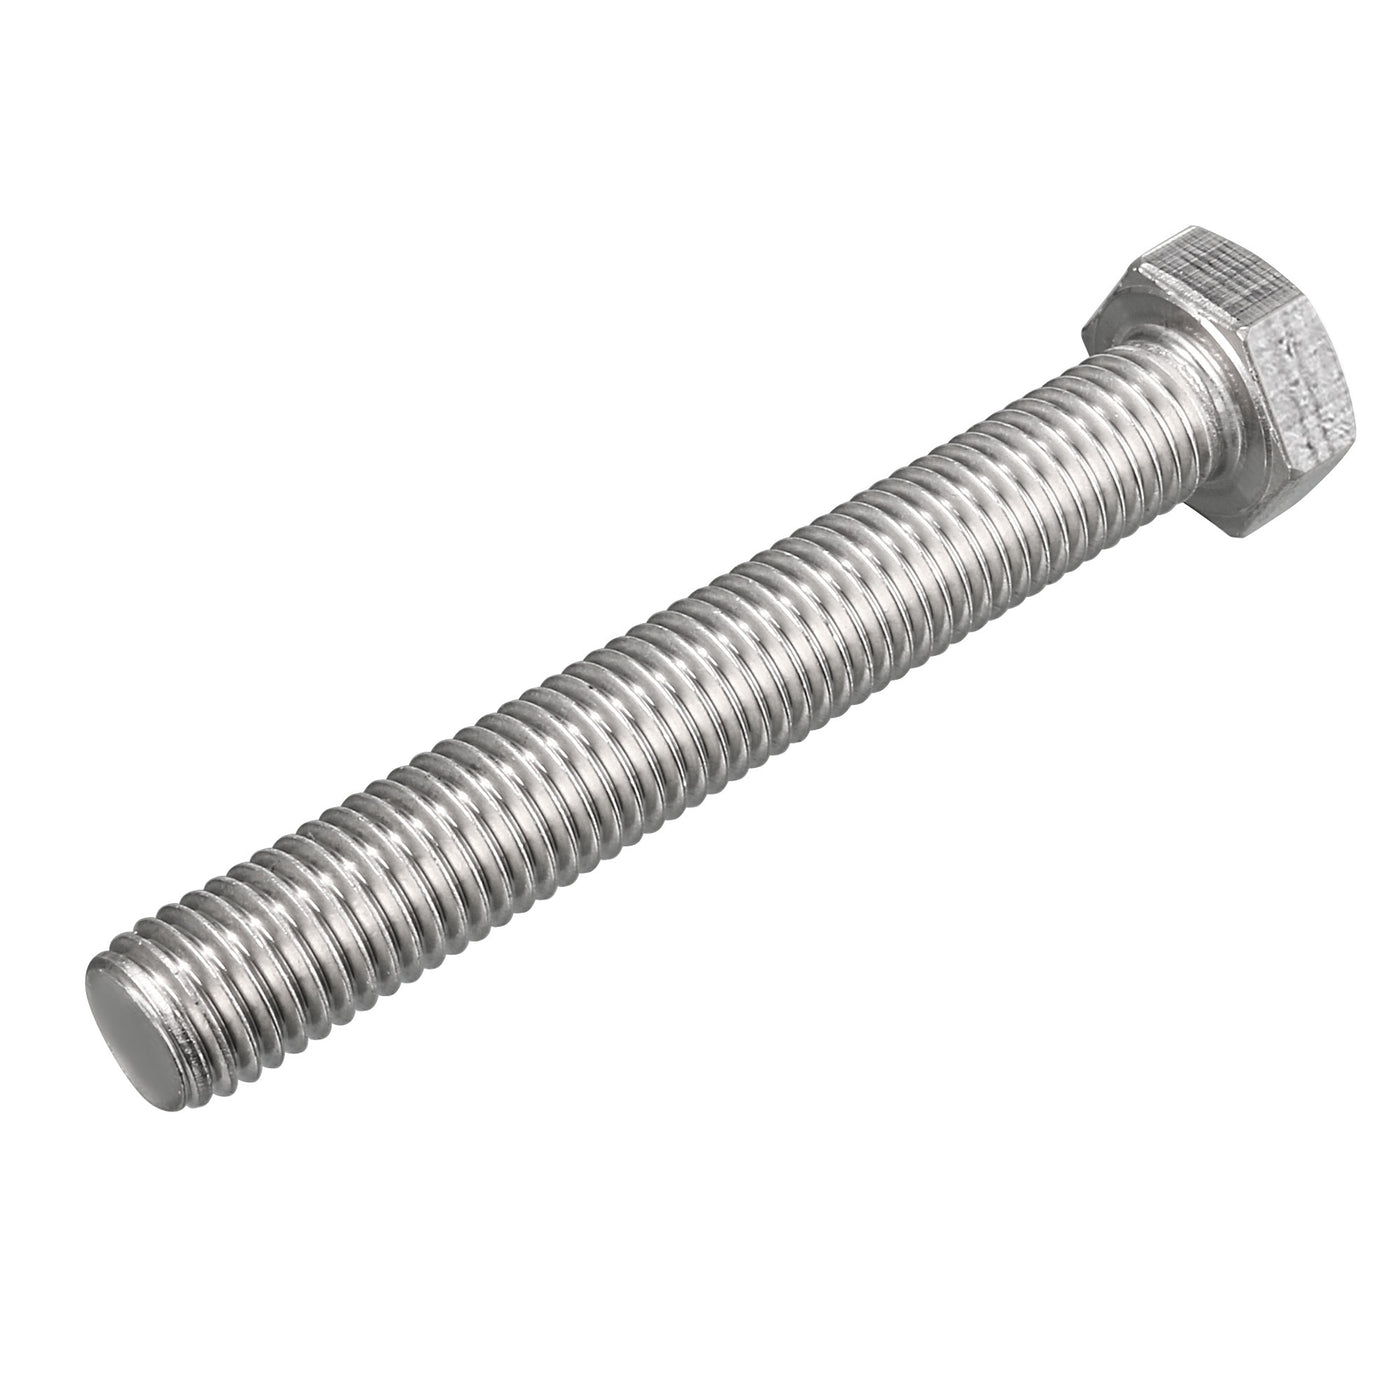 Uxcell Uxcell Hex Screw Bolt, Metric M14x100mm 304 Stainless Steel Fully Threaded Bolts 1pcs